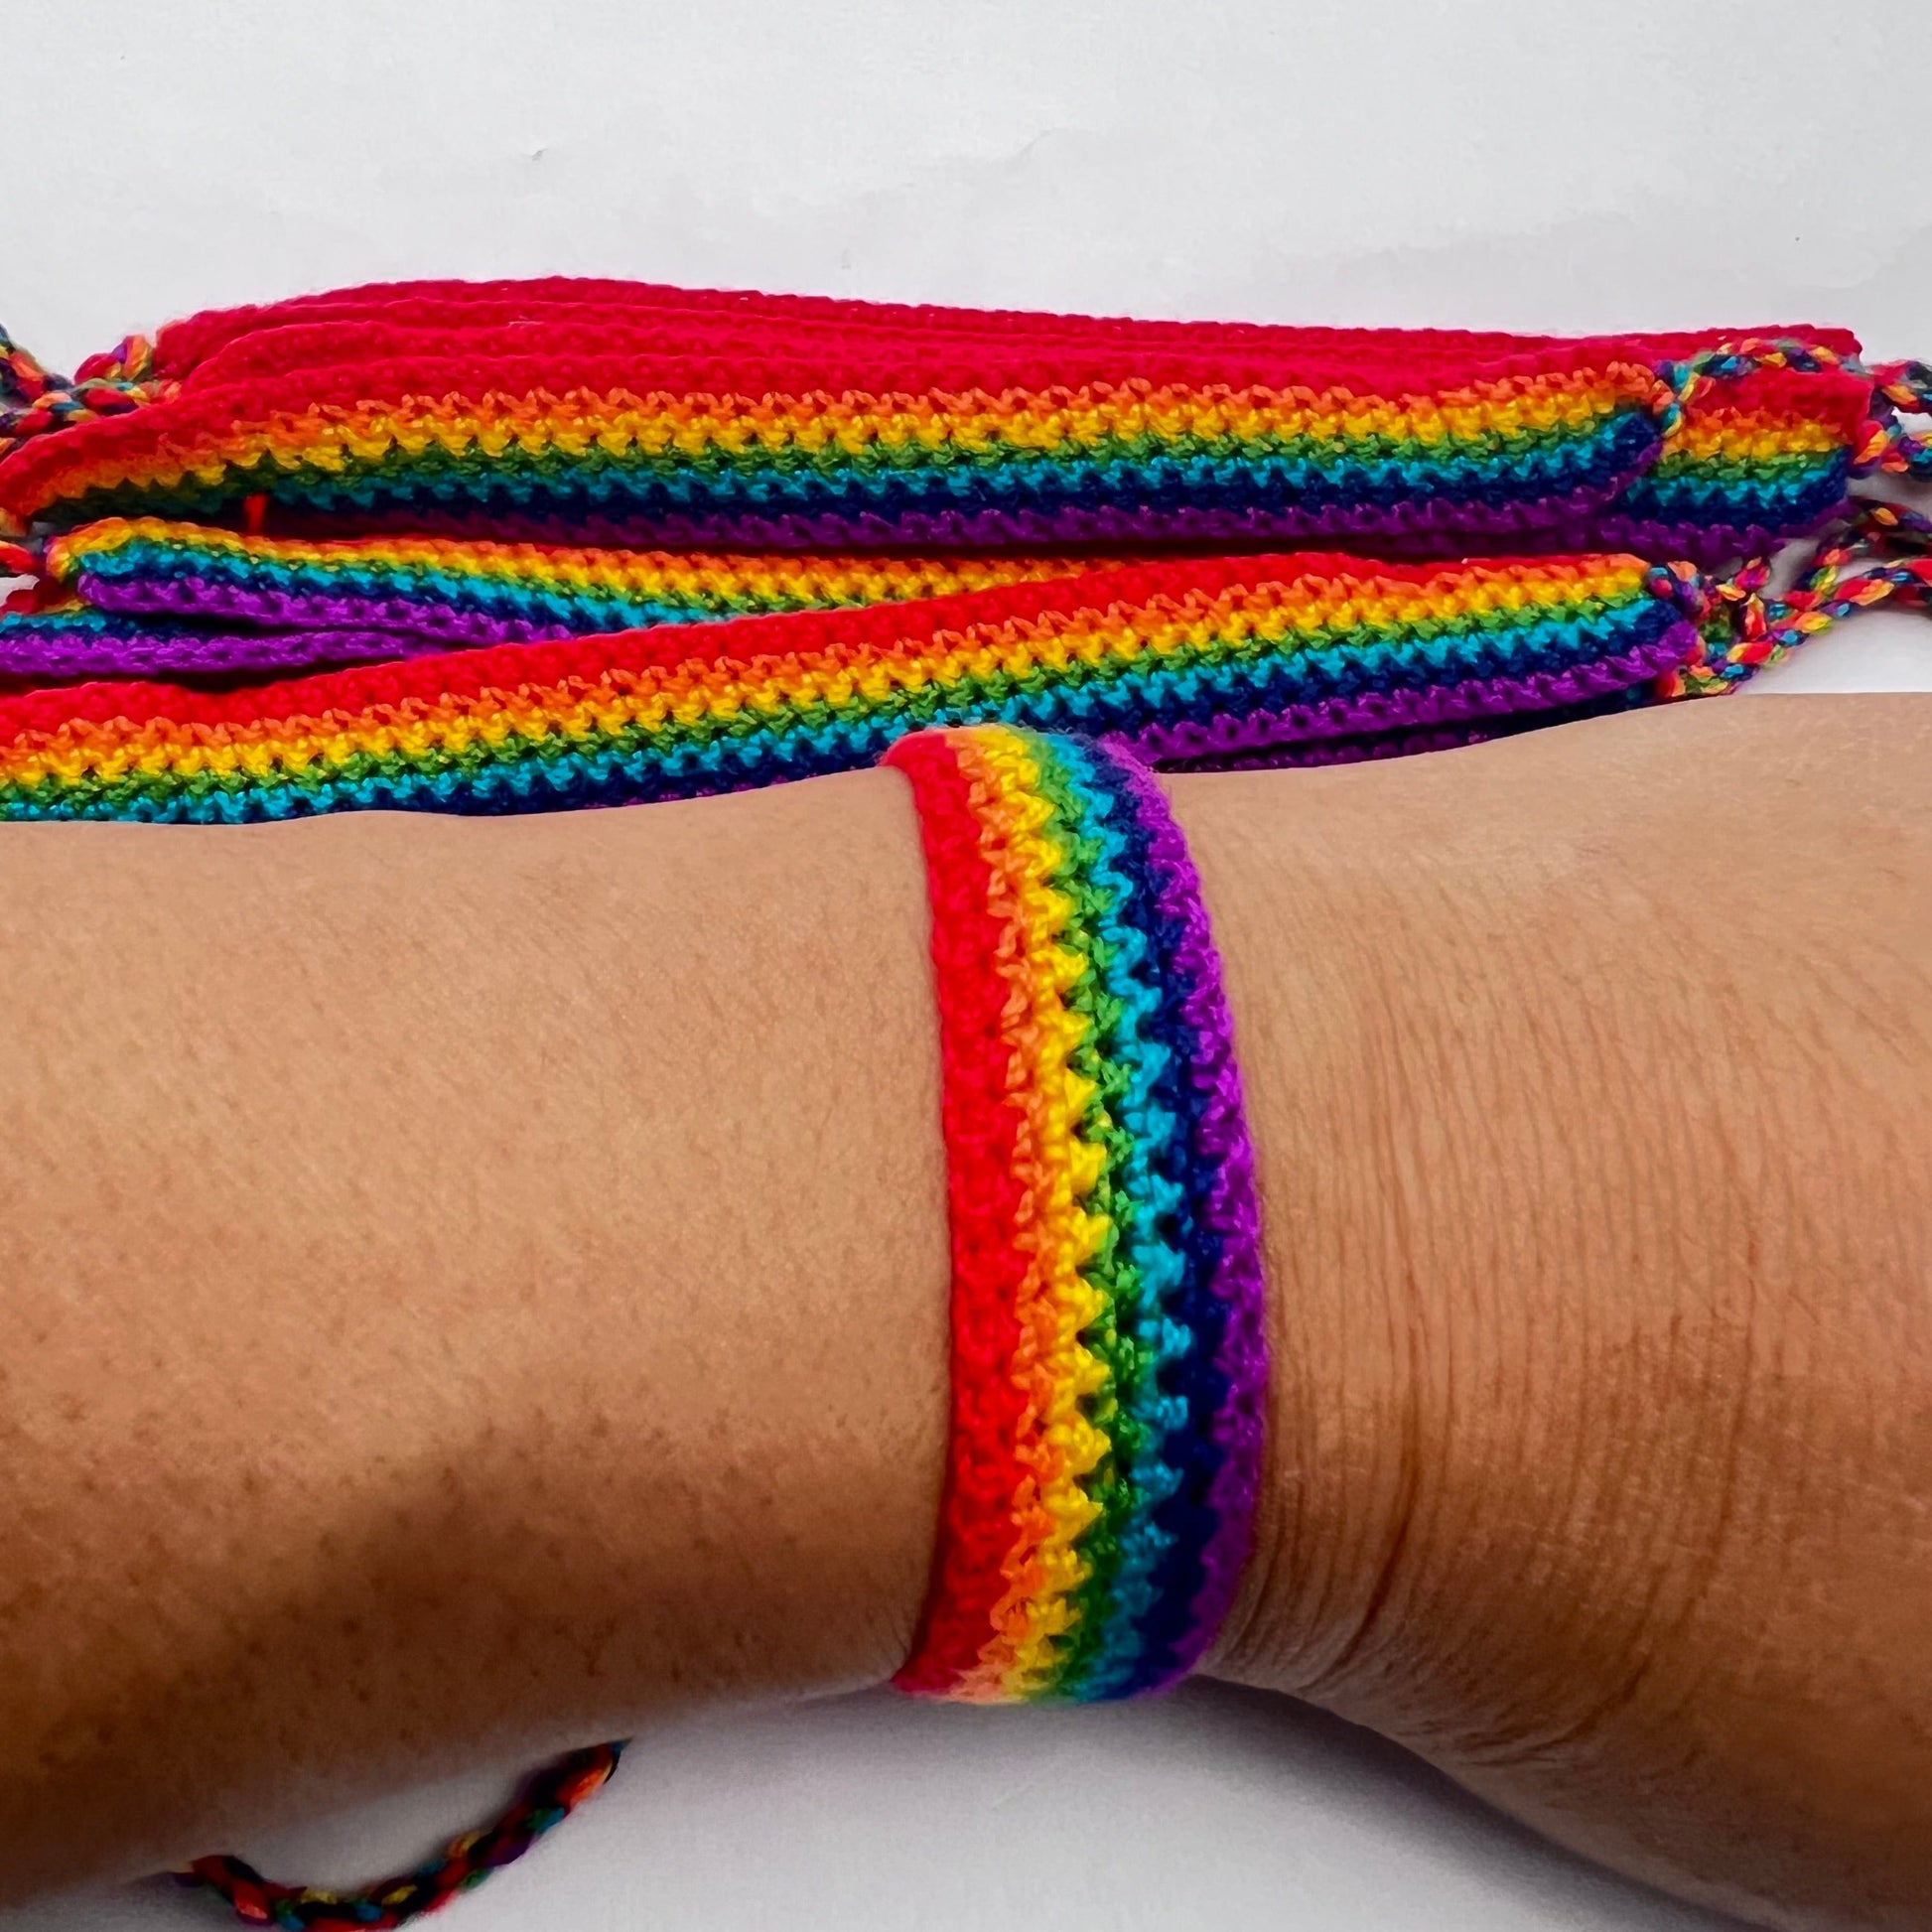 Pack of 10 Gay pride Cotton Bracelets Rainbow Handmade Friendships Wristbands Jewellery for unisex